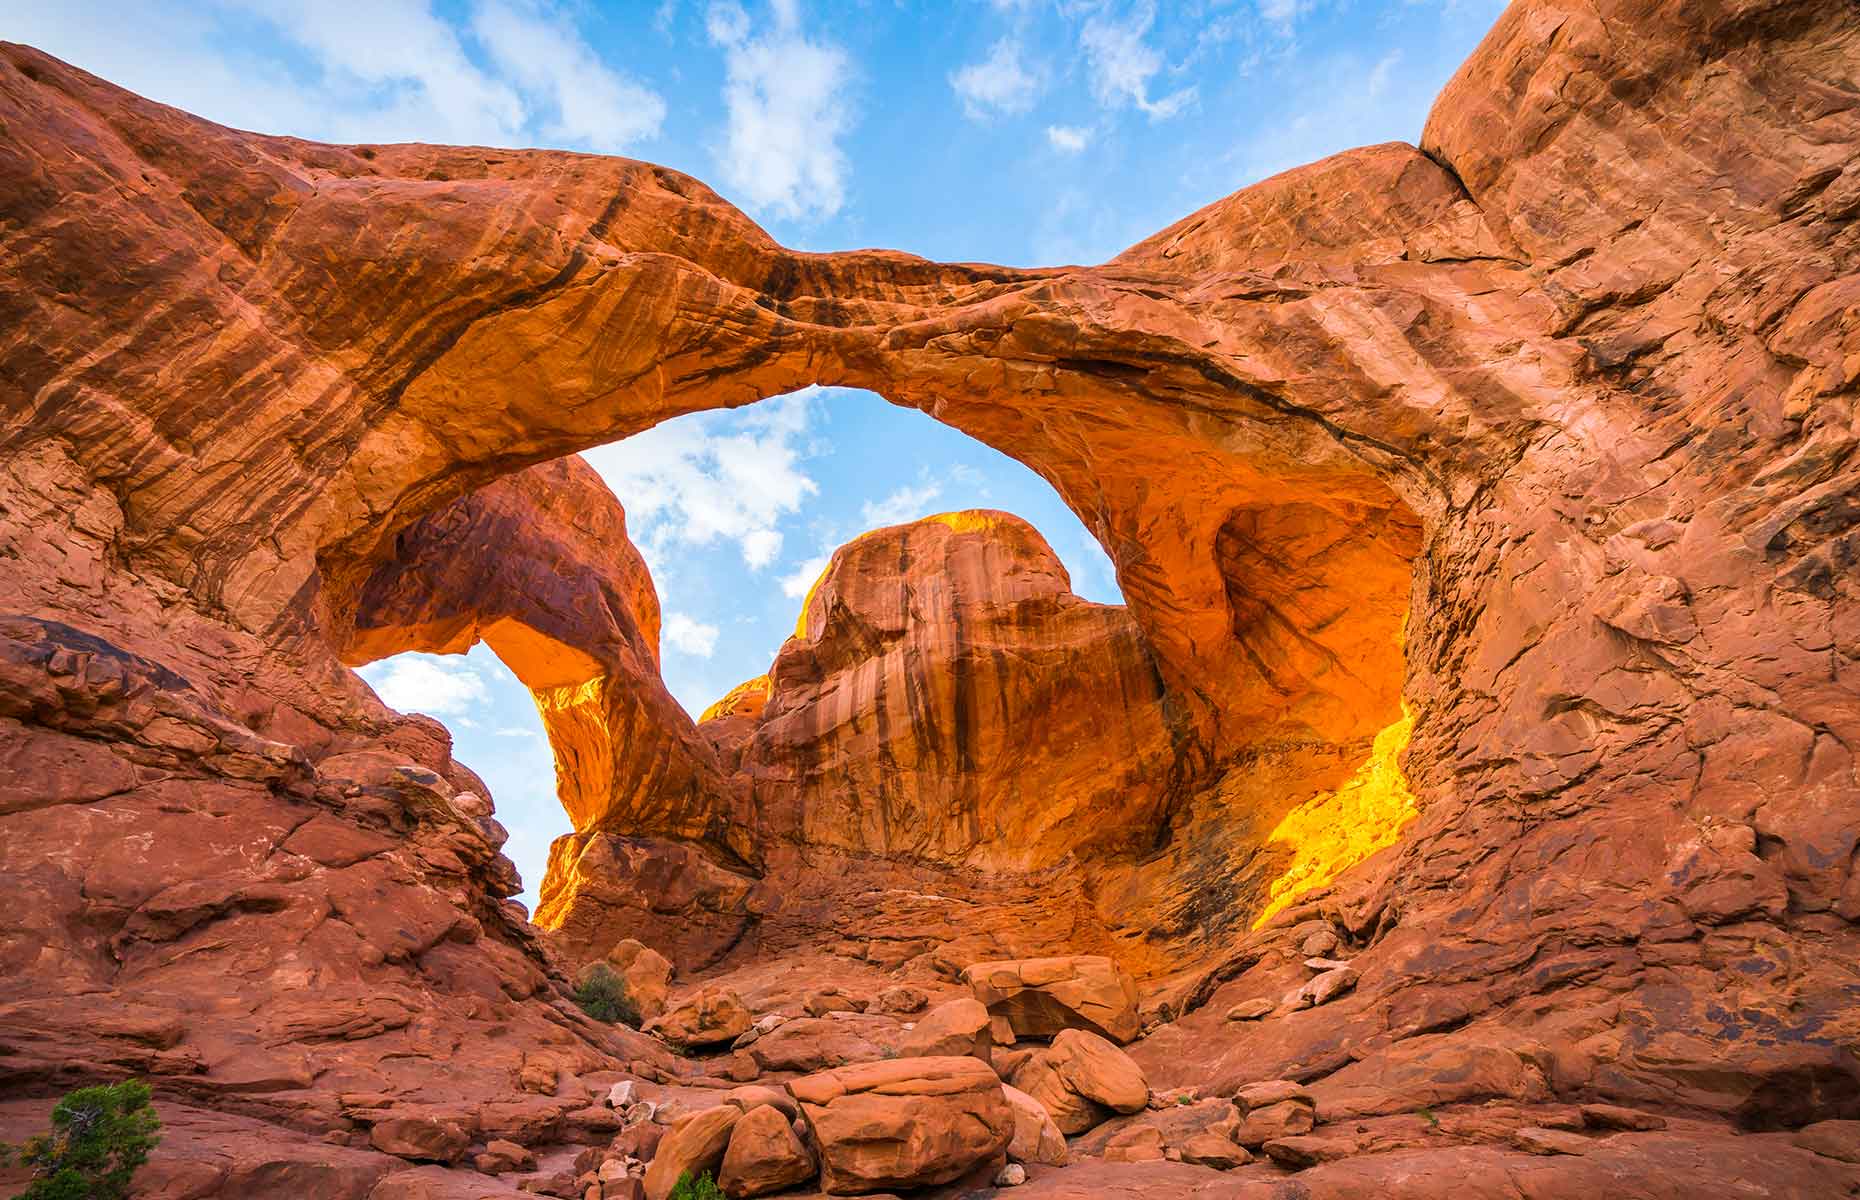 Arches National Park (Image: Checubus/Shutterstock)